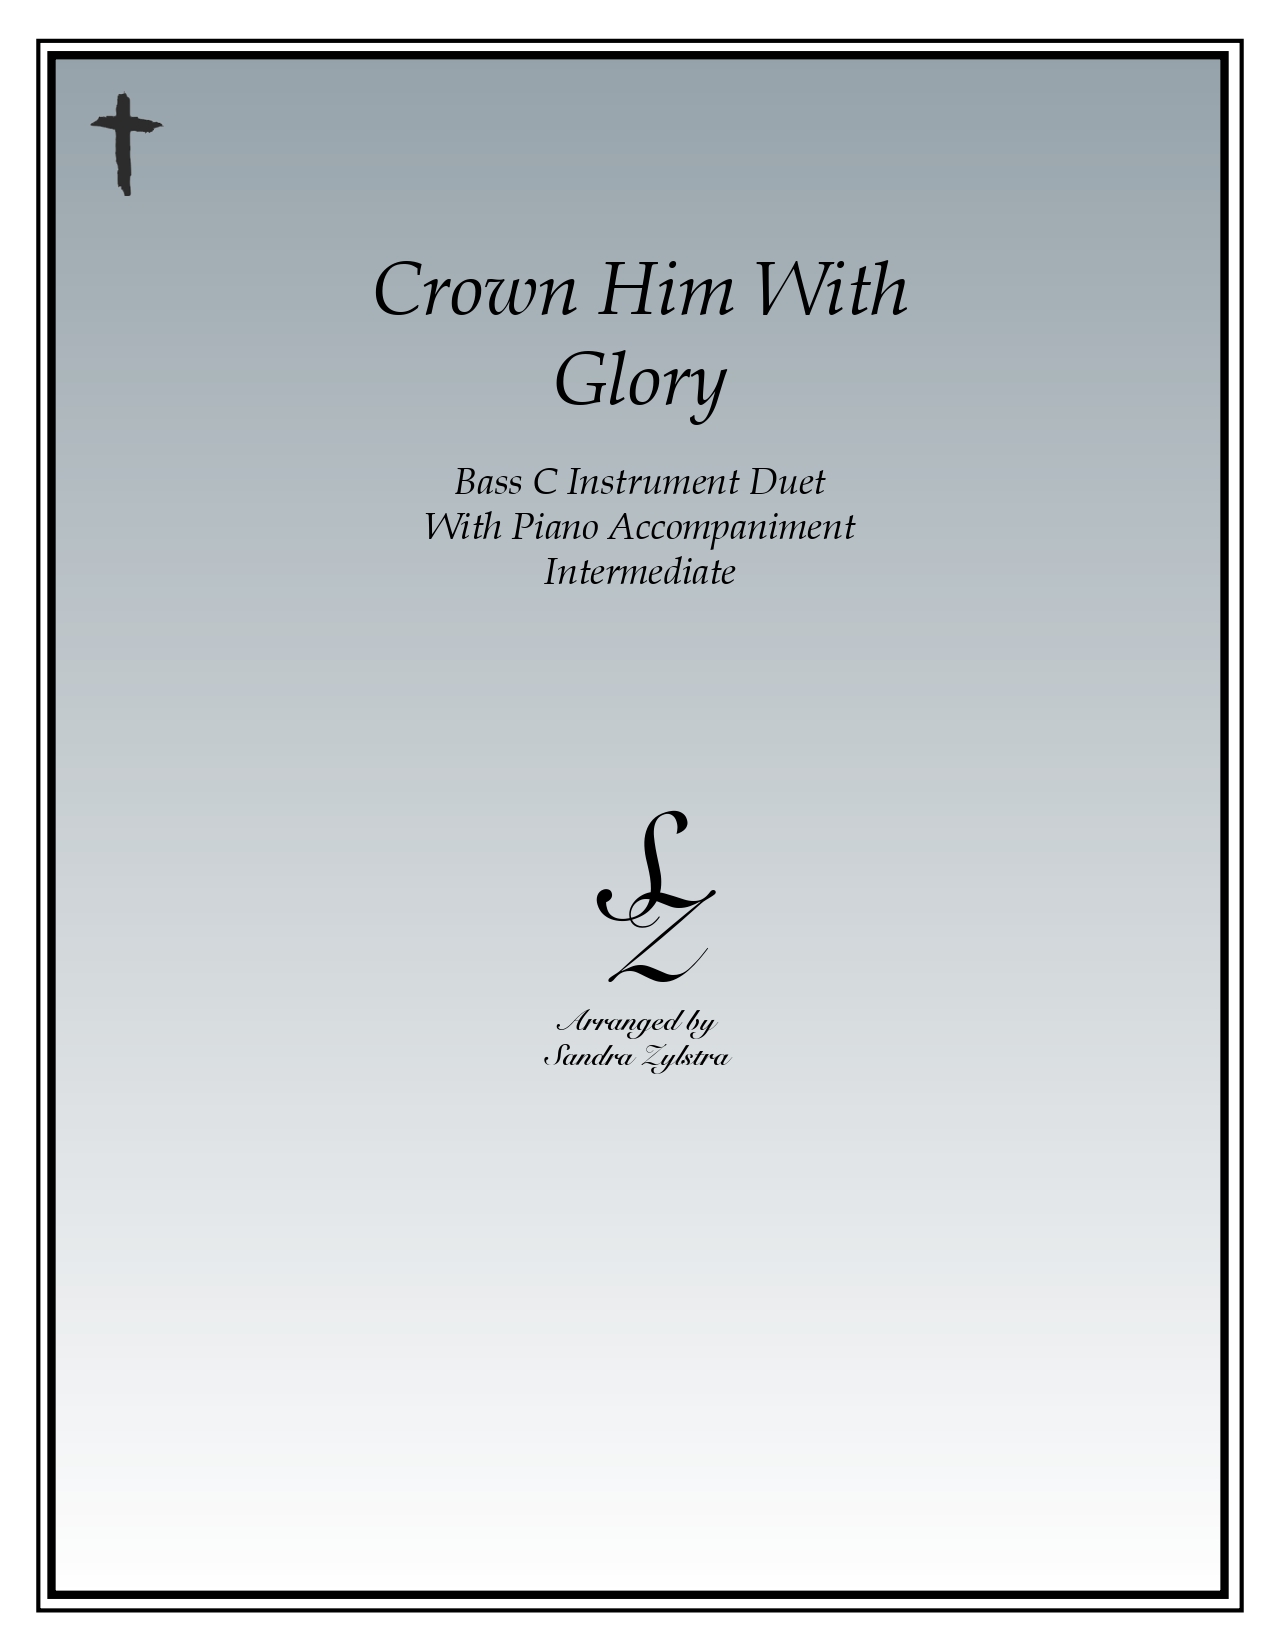 Crown Him With Glory bass C instrument duet parts cover page 00011